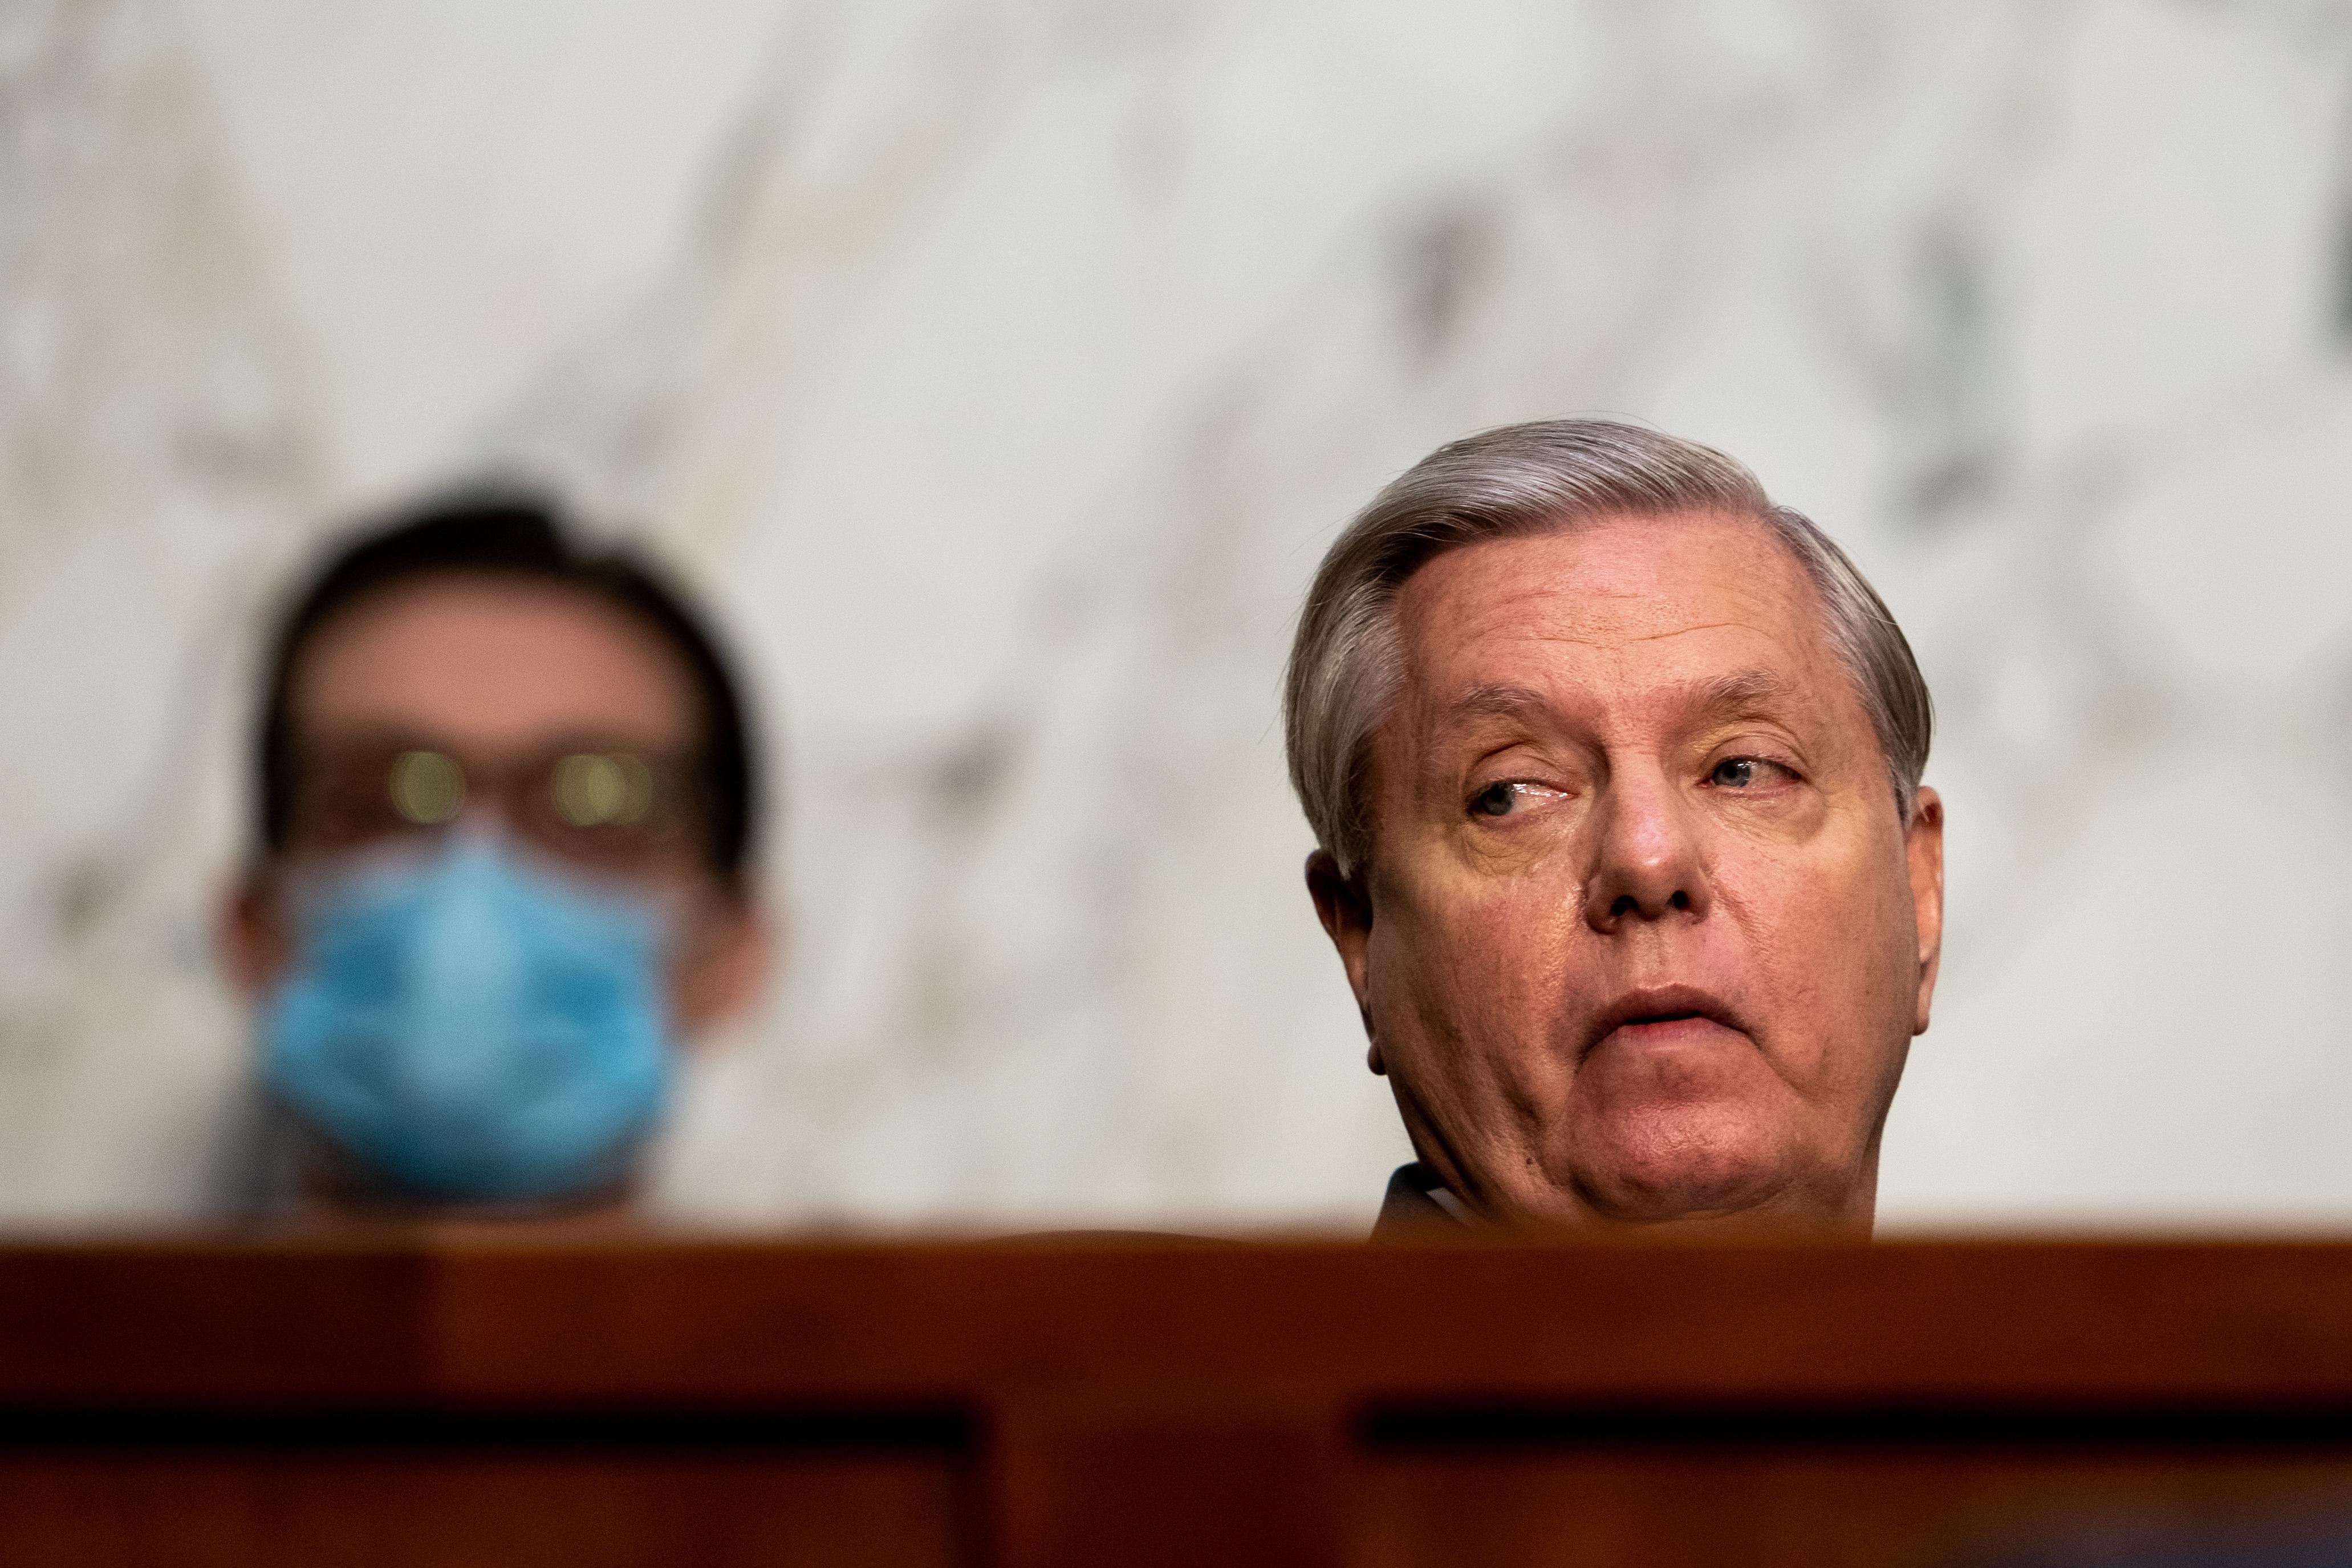 Committee chairman U.S. Sen. Lindsey Graham listens during Supreme Court Justice nominee Judge Amy Coney Barrett's Senate Judiciary Committee confirmation hearing for Supreme Court Justice in the Hart Senate Office Building on October 12, 2020 in Washington, DC.